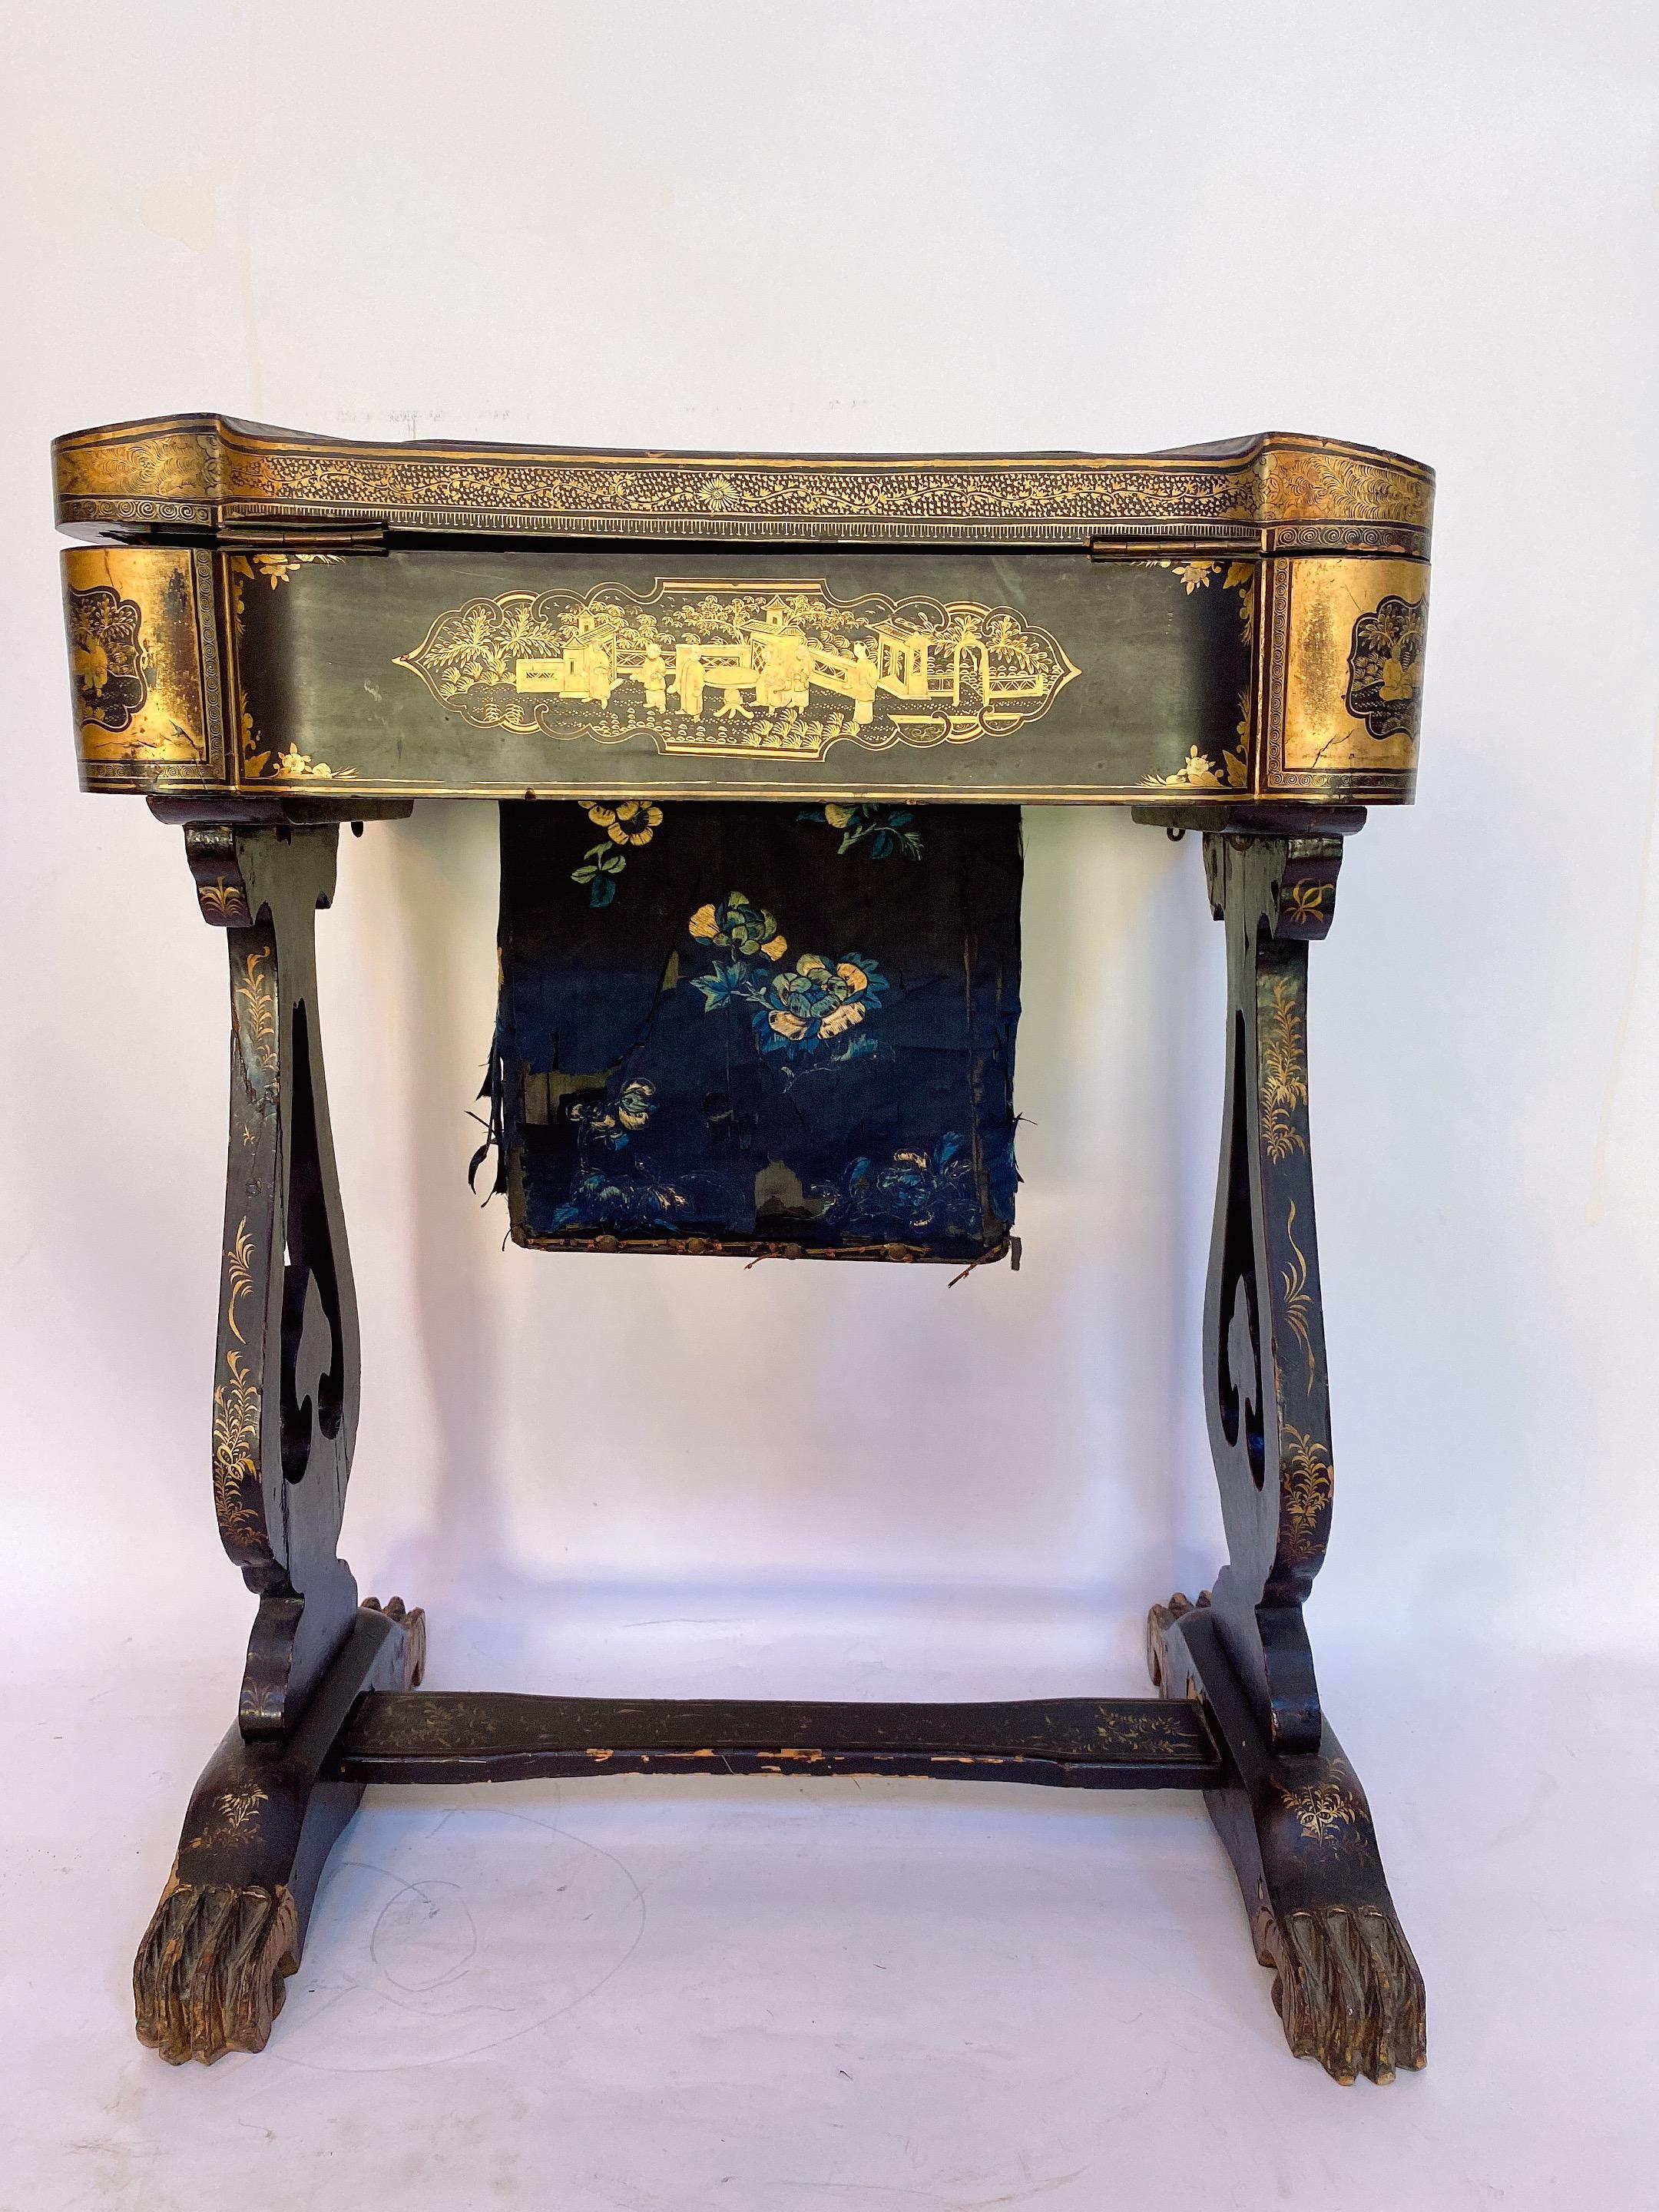 Antique 19th century Chinese lacquer sewing table with hand painted scenes and beautiful legs. Gilt export black lacquer all-over the table. see more photos . 